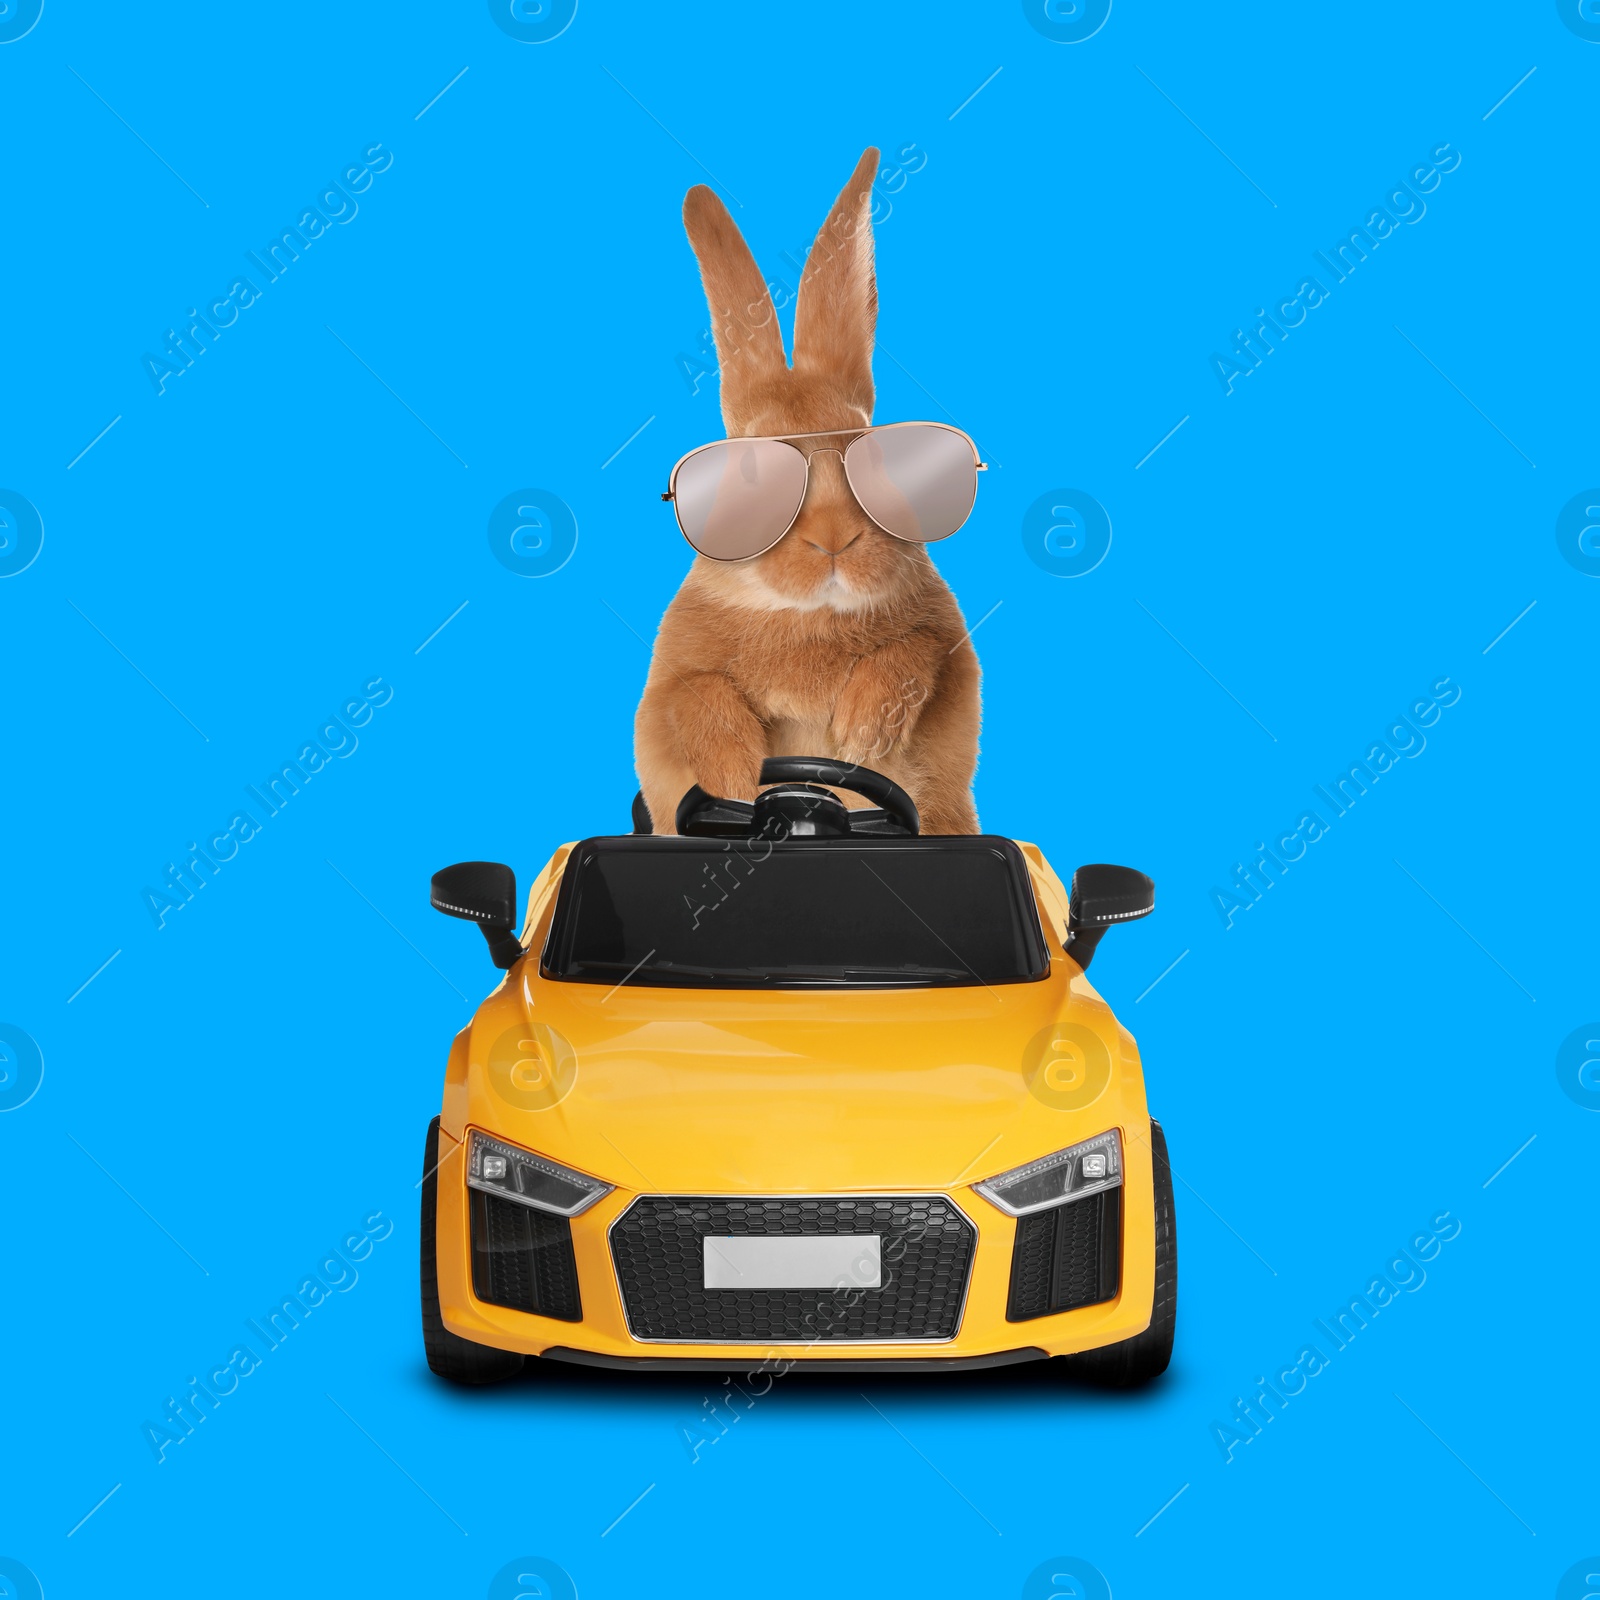 Image of Adorable bunny with stylish sunglasses in toy car on light blue background